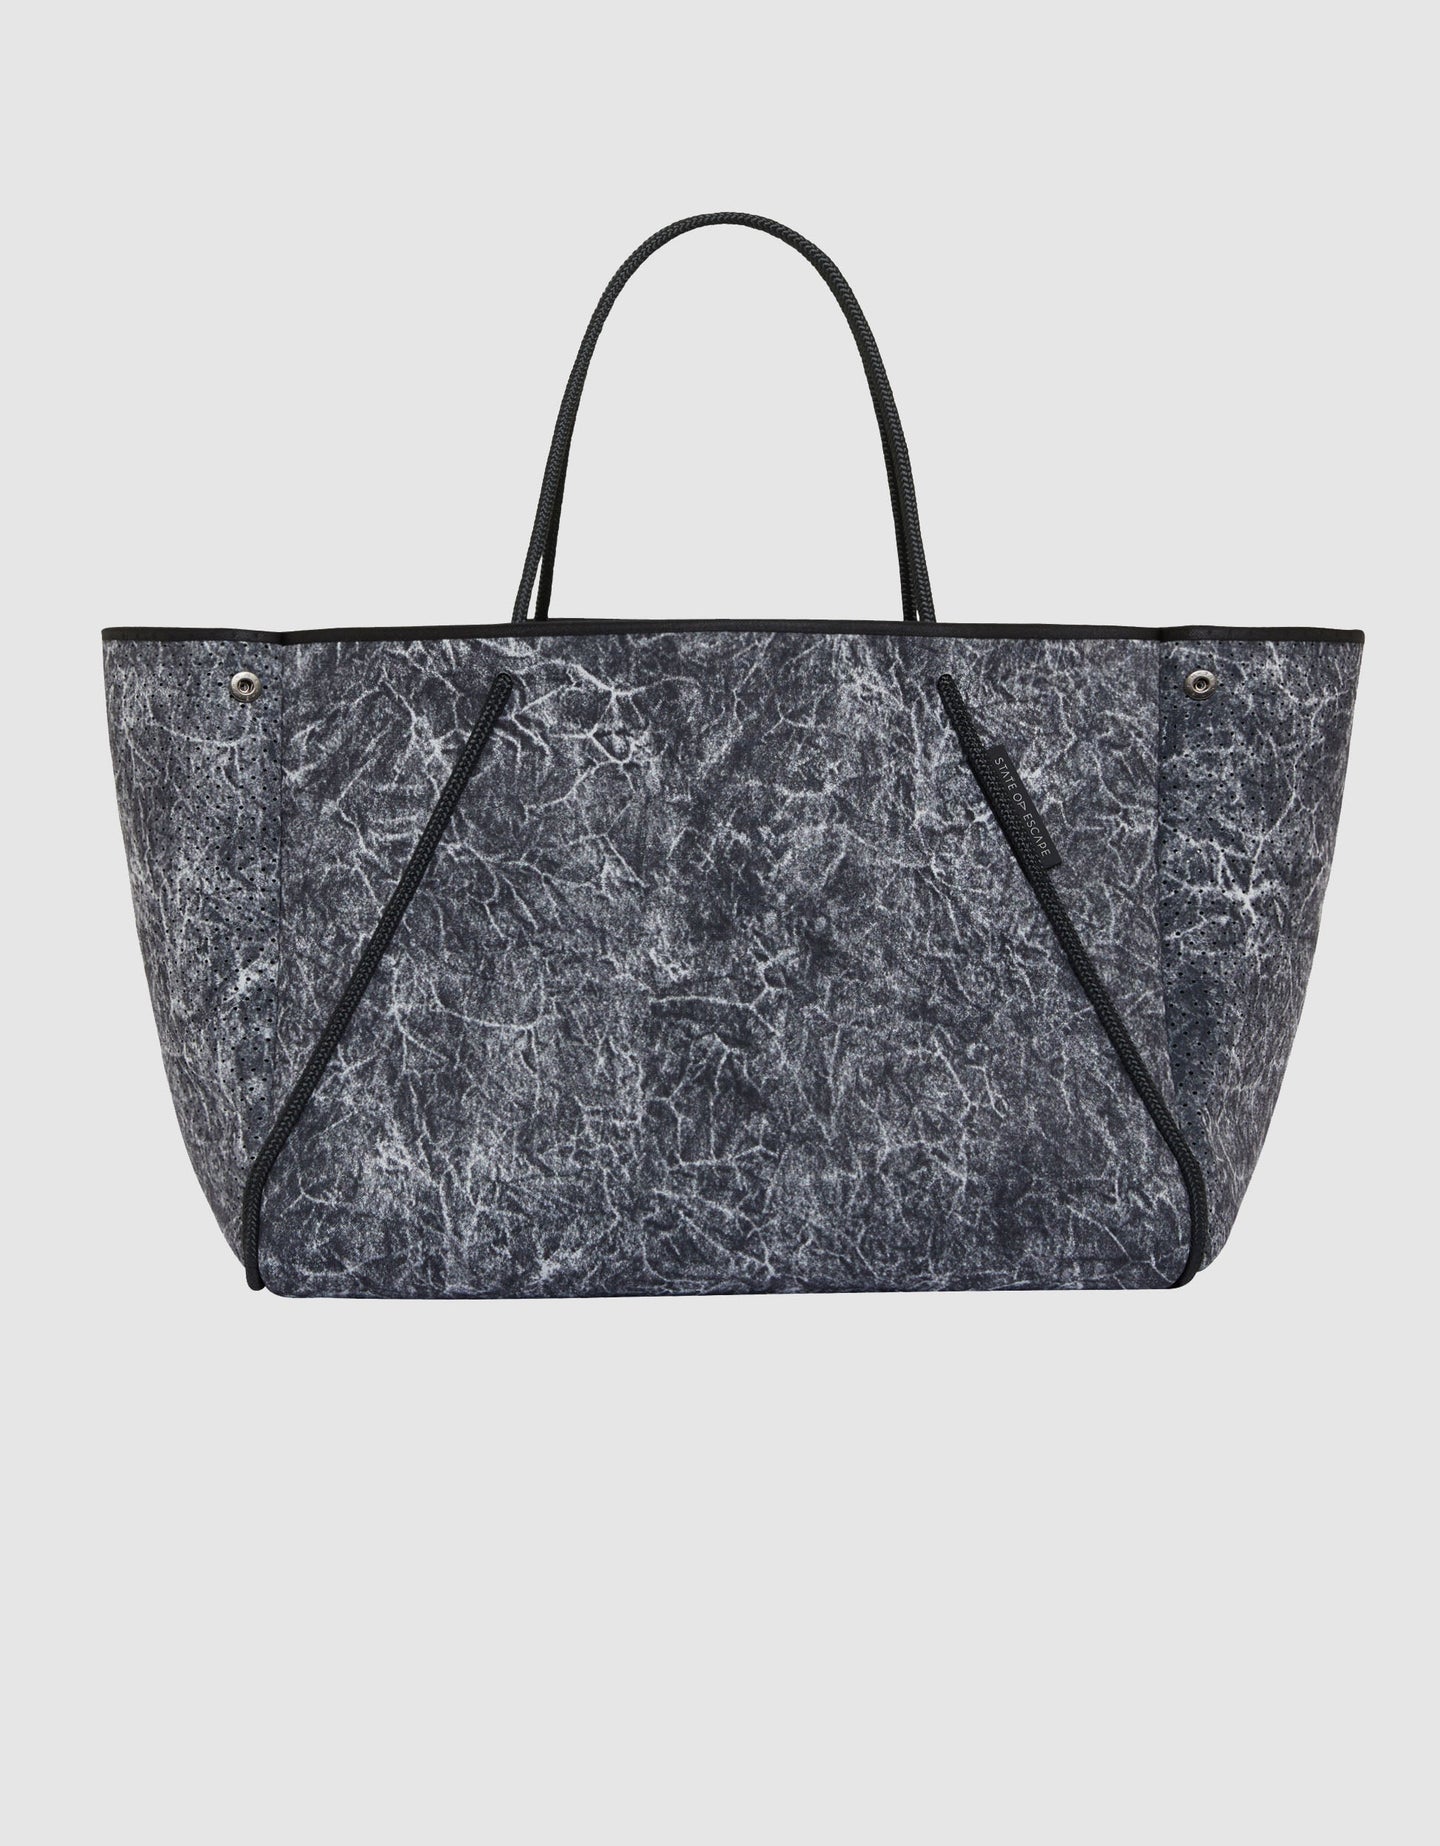 Guise tote in acid washed black print – State of Escape